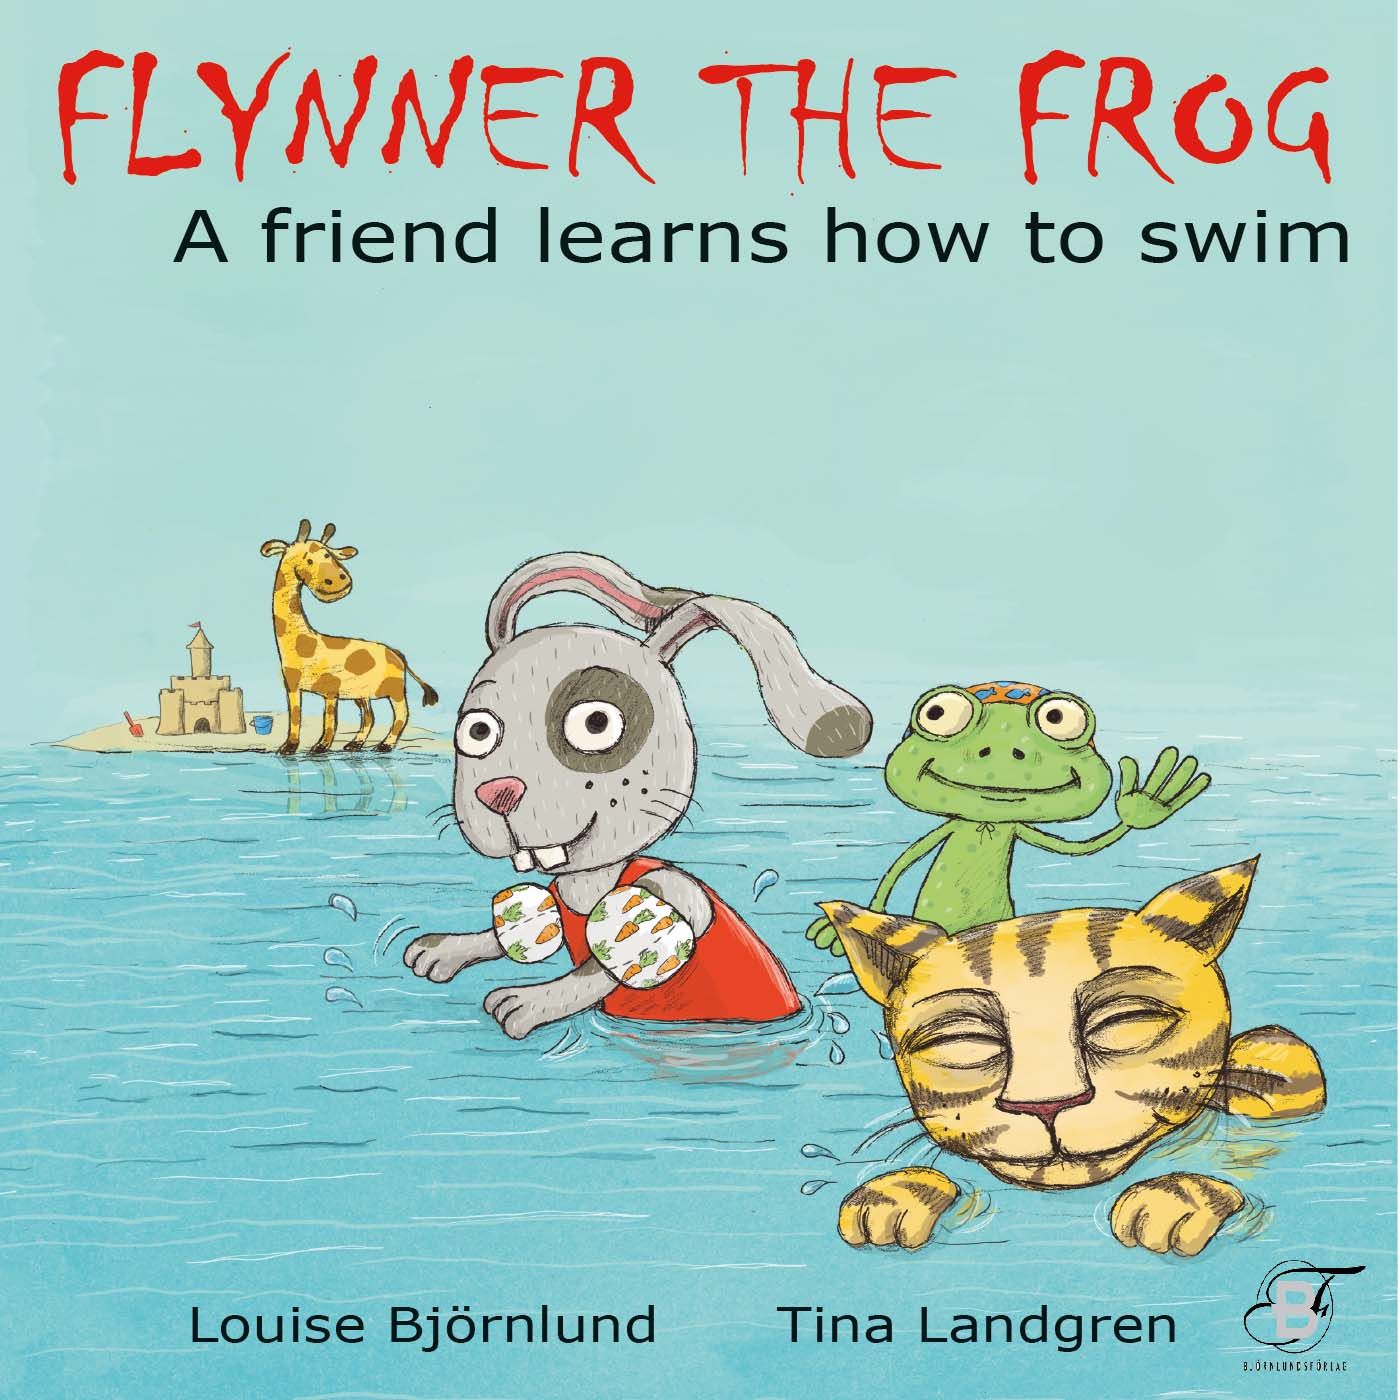 Flynner the frog : A friend learns how to swim, eBook by Louise Björnlund